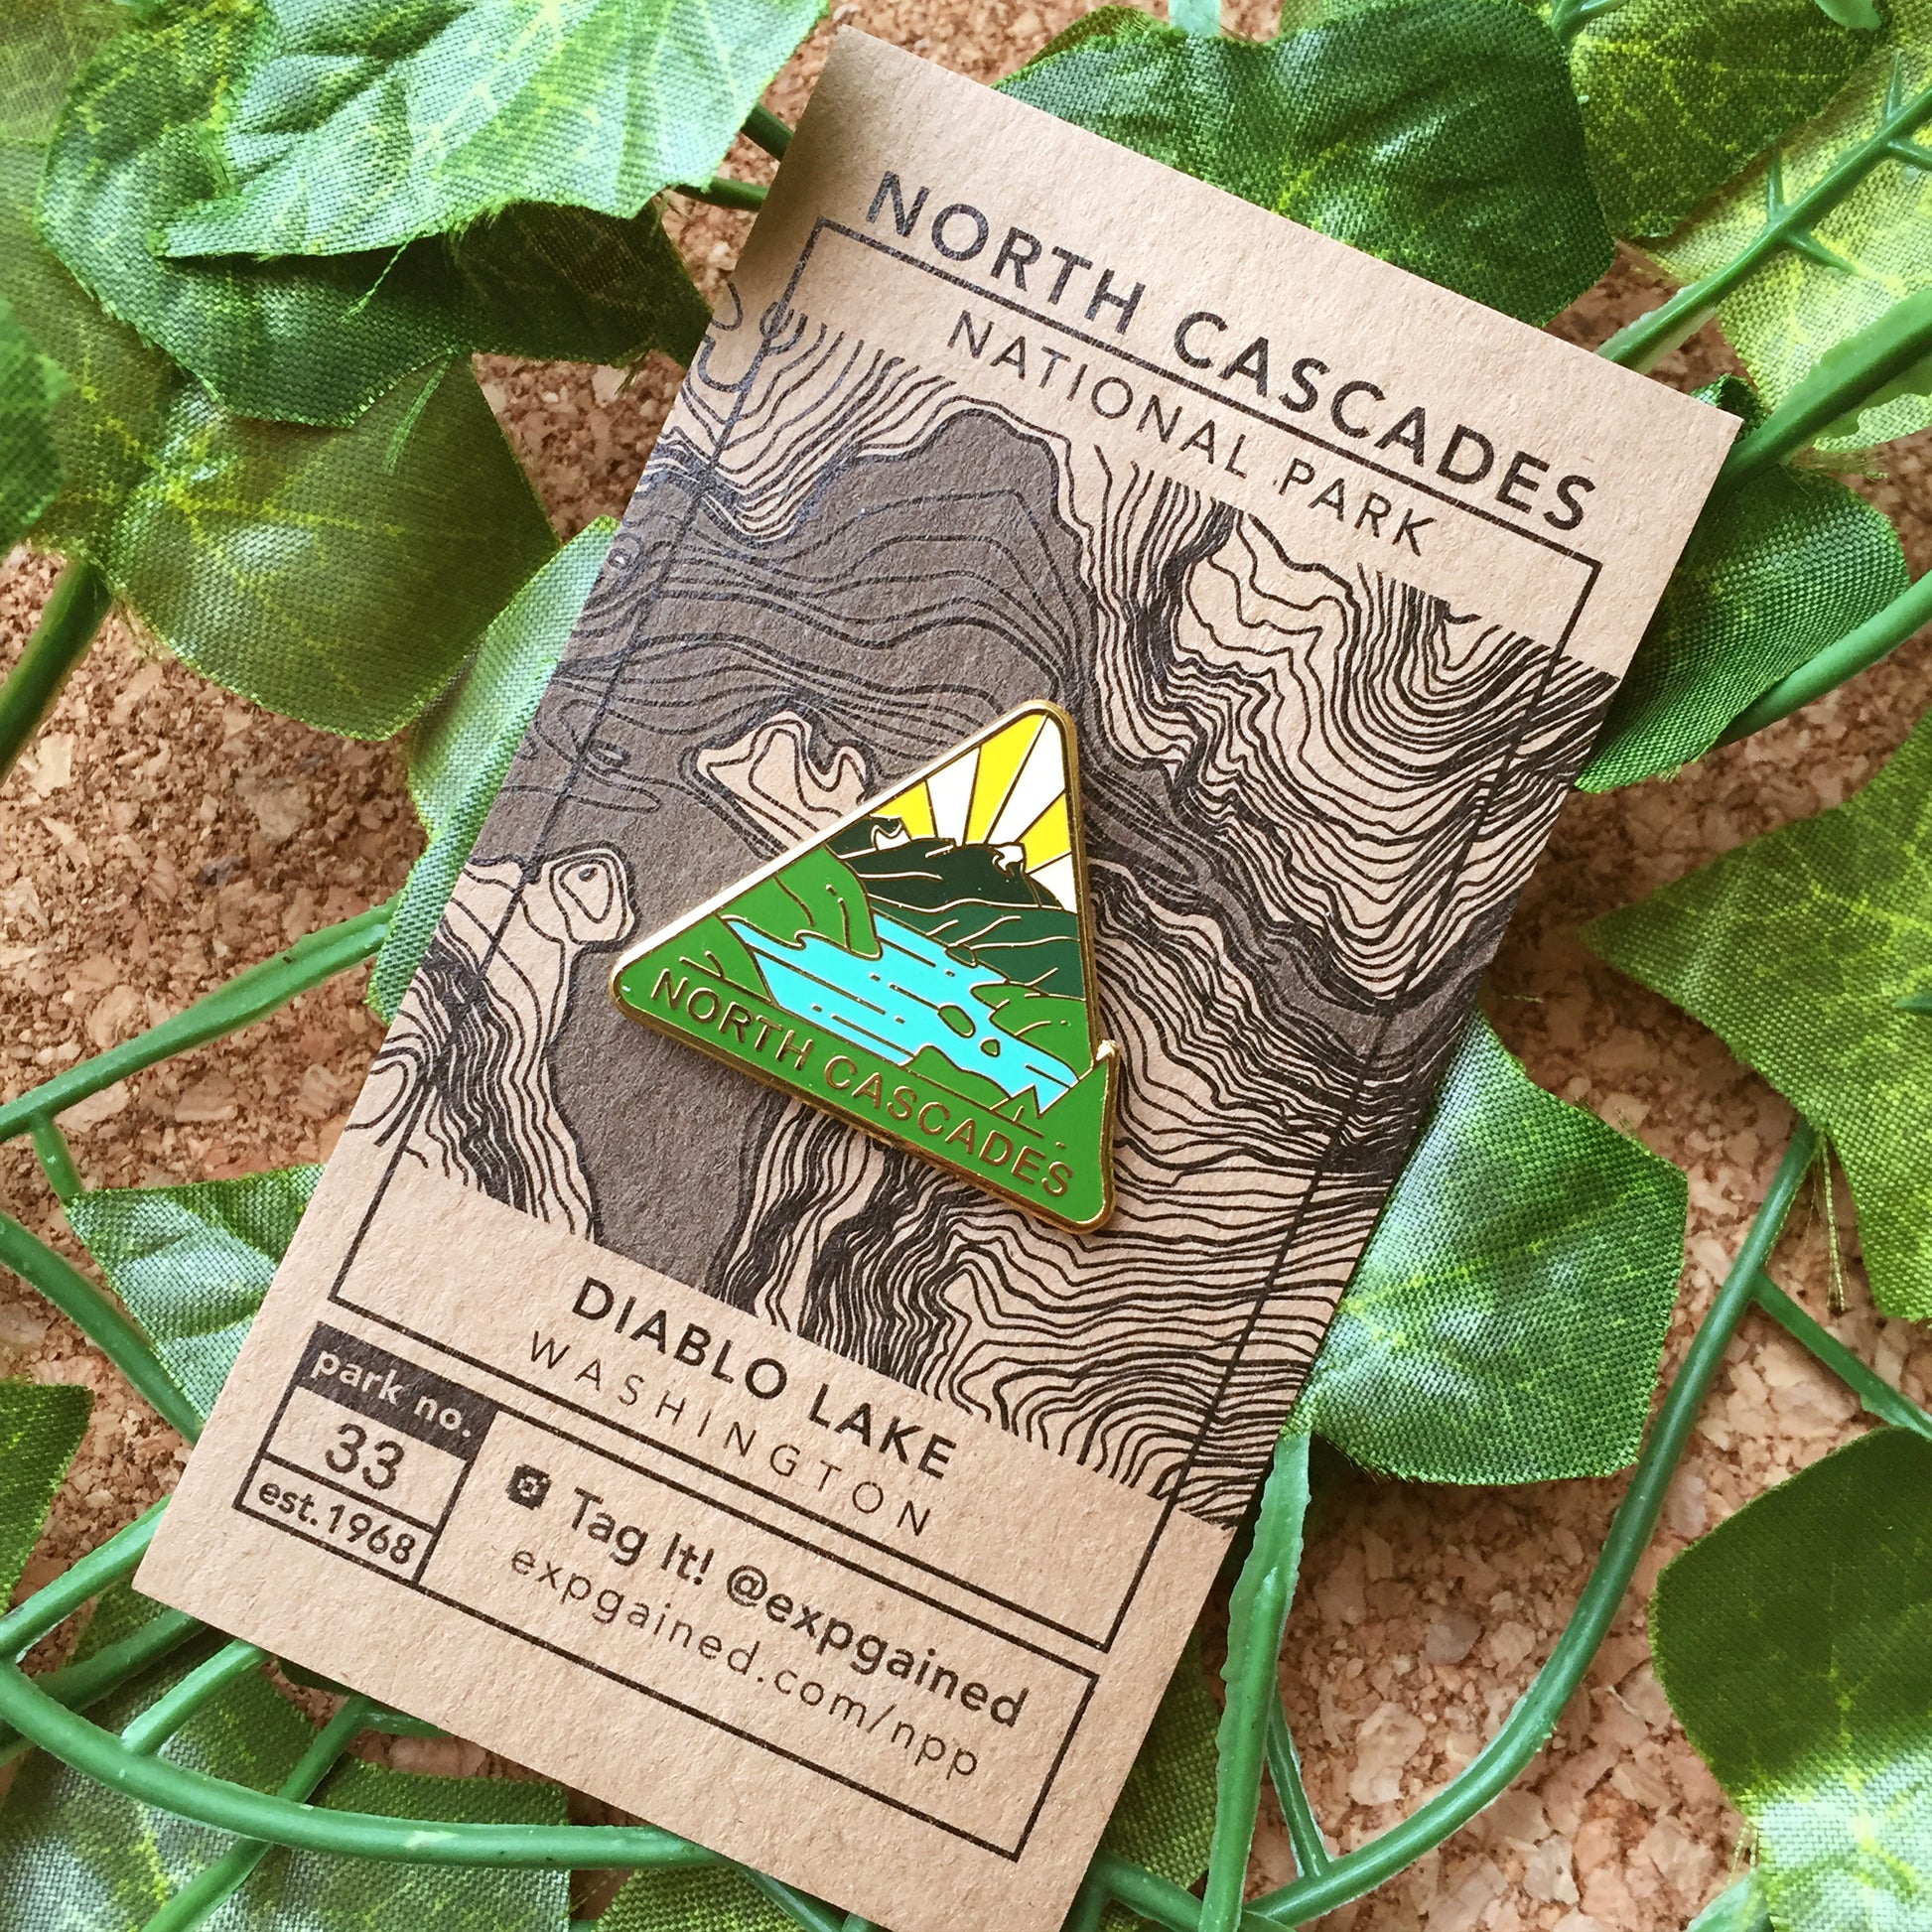 Triangle North Cascades national park enamel pin featuring a view from the beehive hike on a brown business card size backing card with a topo map of Diablo Lake.